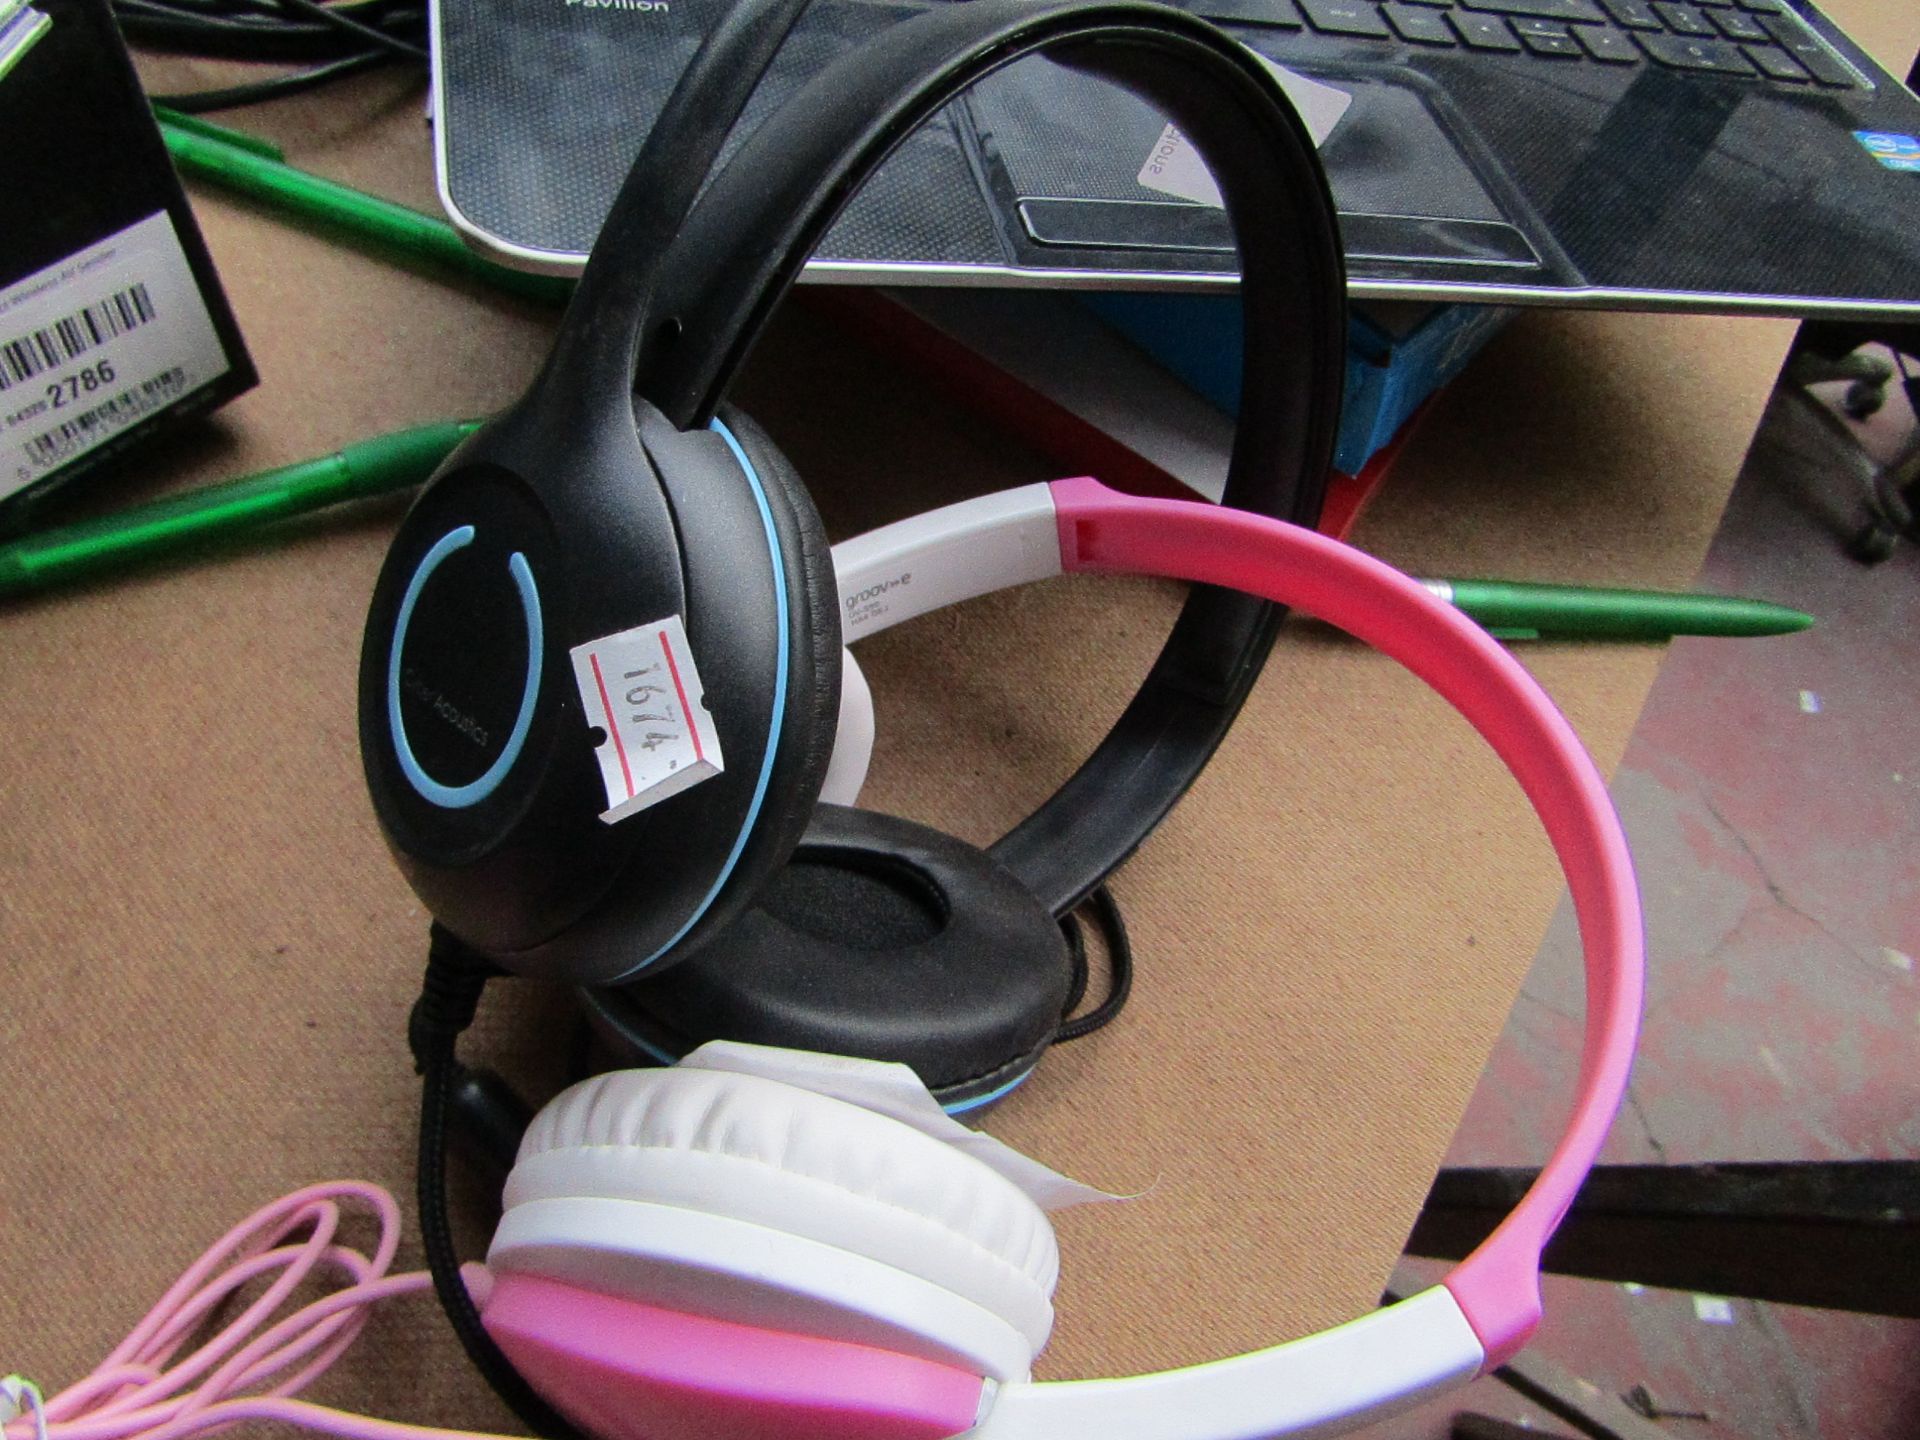 Groove Girls' Headphones, Tested Working for Sound Only & Cyber Acoustics Headphones, Tested Working